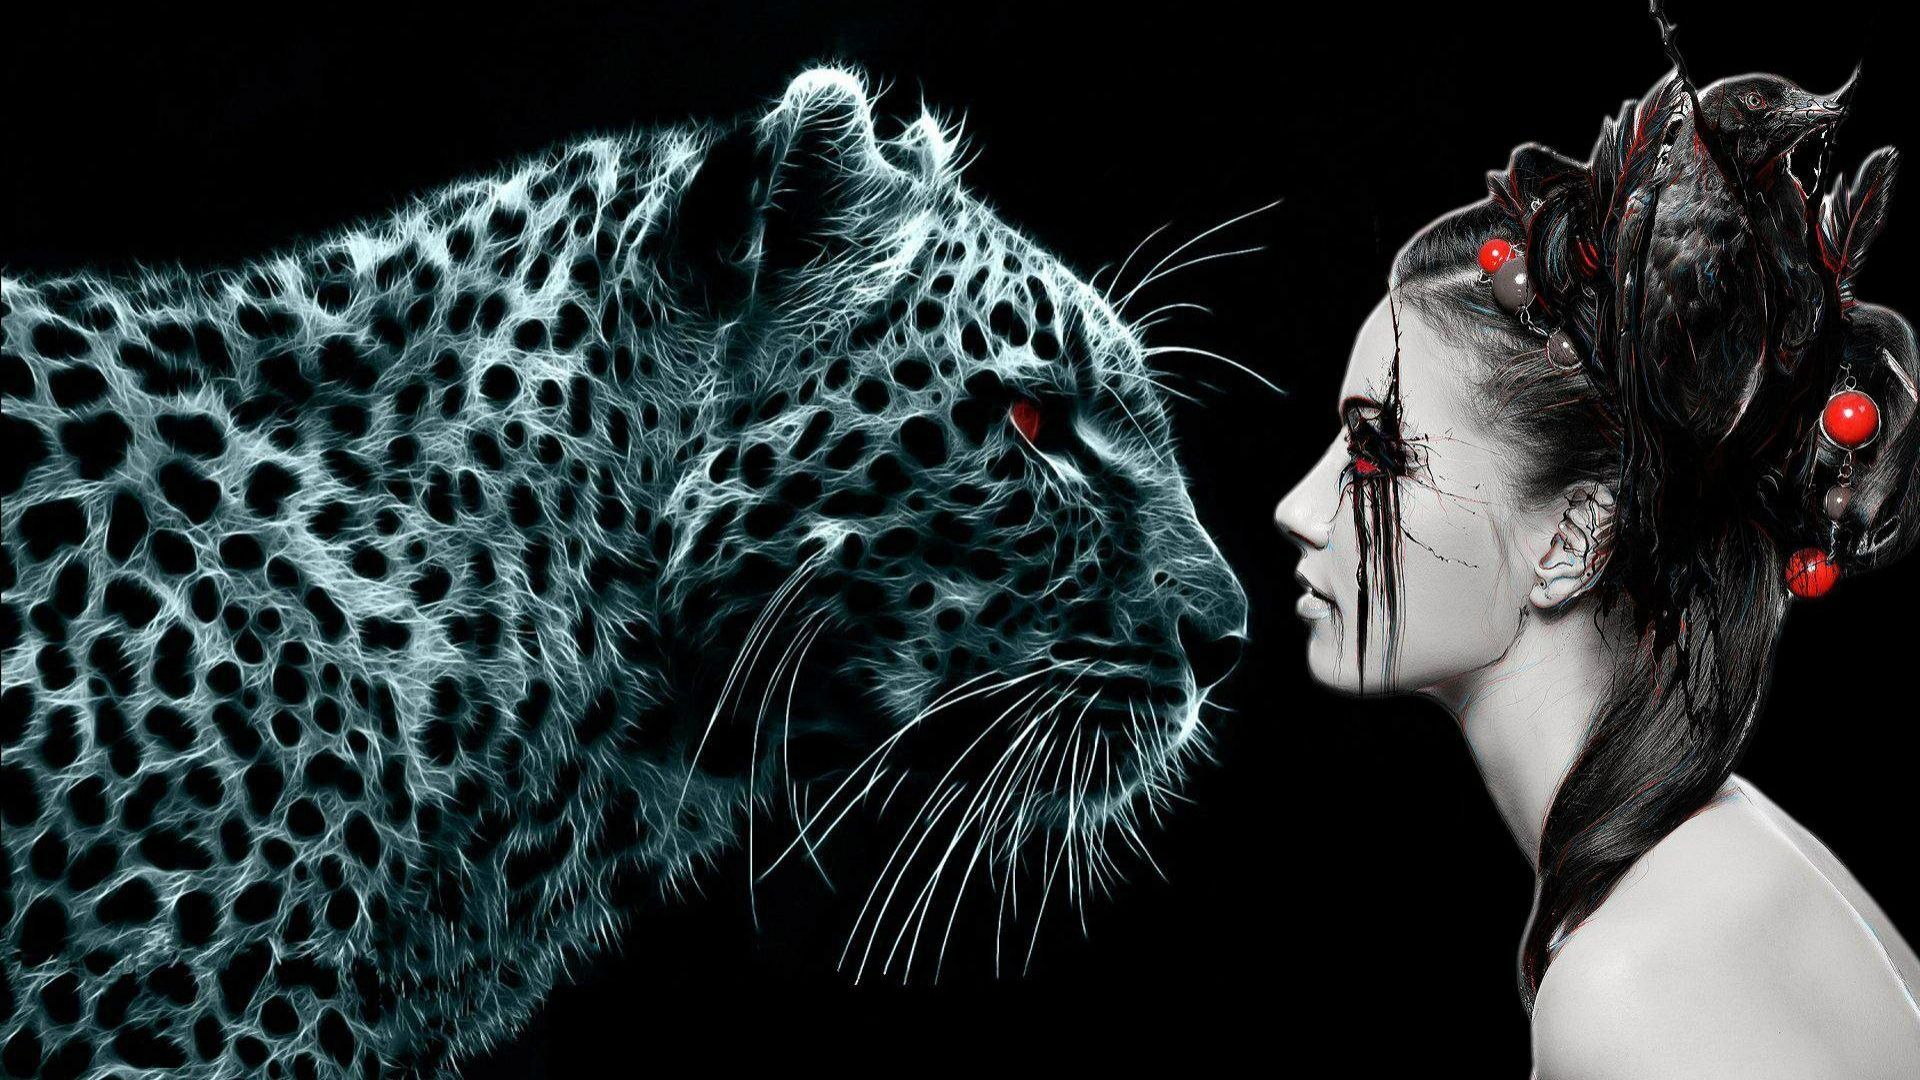 Leopard and woman [1920x1080]